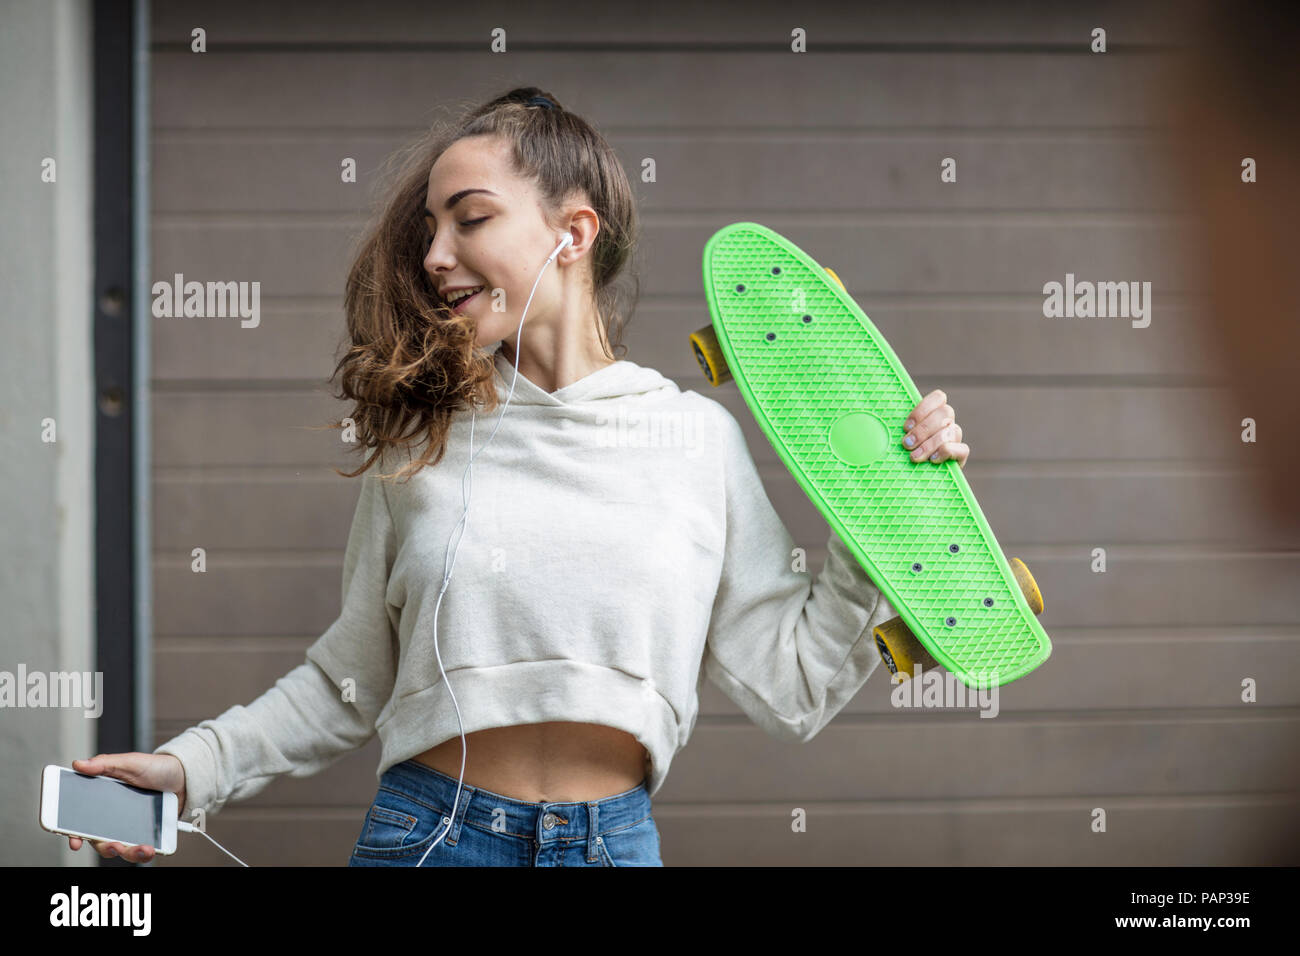 Carefree teenage girl dancing while holding skateboard and listening to music Stock Photo